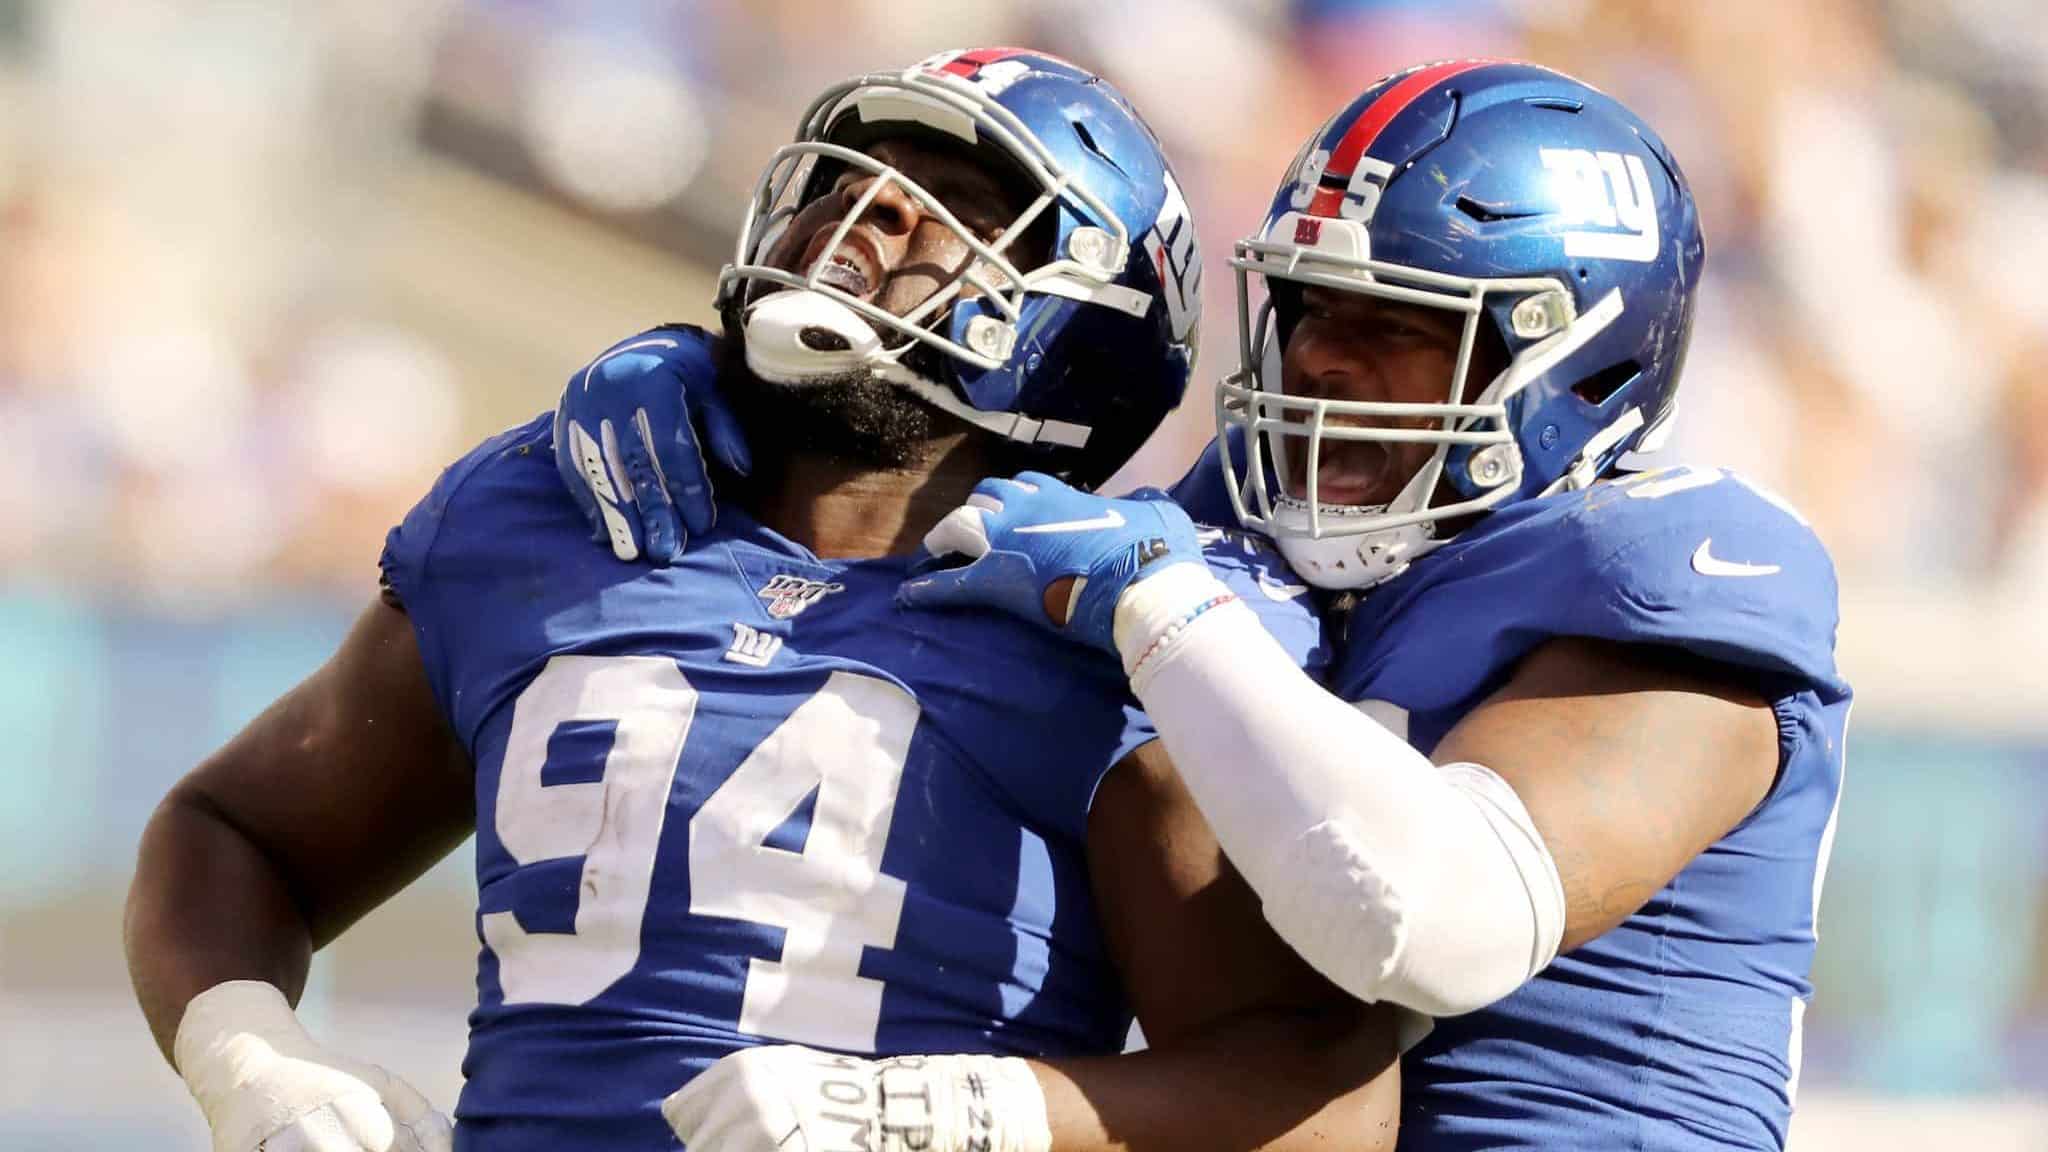 EAST RUTHERFORD, NEW JERSEY - SEPTEMBER 29: Dalvin Tomlinson #94 and B.J. Hill #95 of the New York Giants celebrate after they sacked Dwayne Haskins Jr. #7 of the Washington Redskins at MetLife Stadium on September 29, 2019 in East Rutherford, New Jersey.